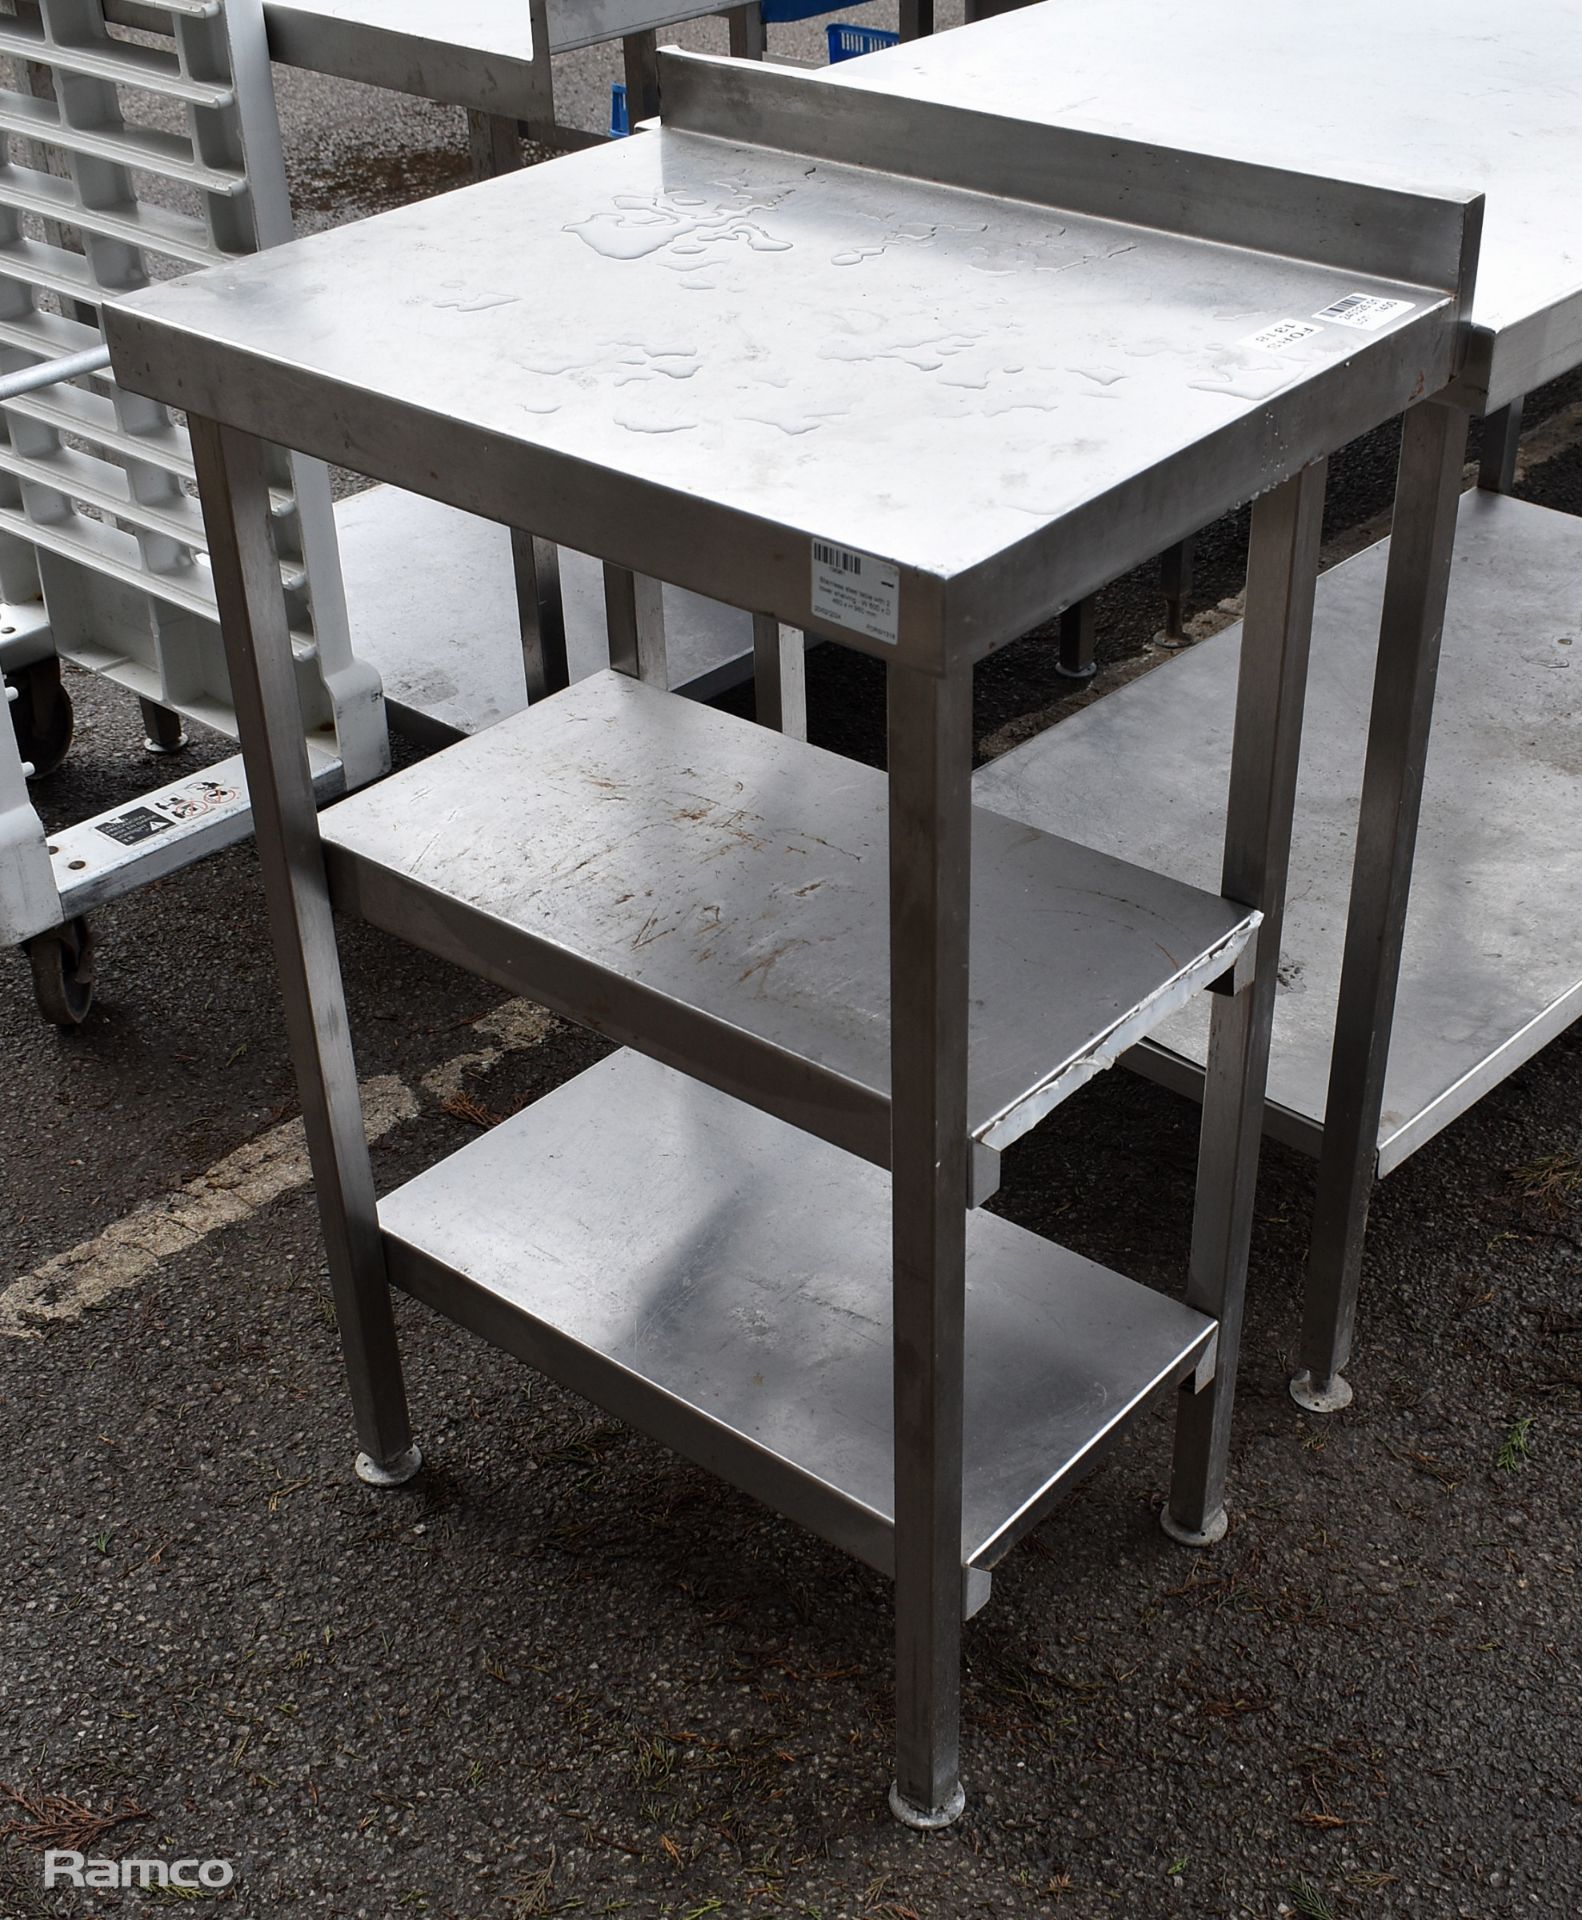 Stainless steel table with 2 lower shelves - W 600 x D 480 x H 960mm - Image 2 of 3